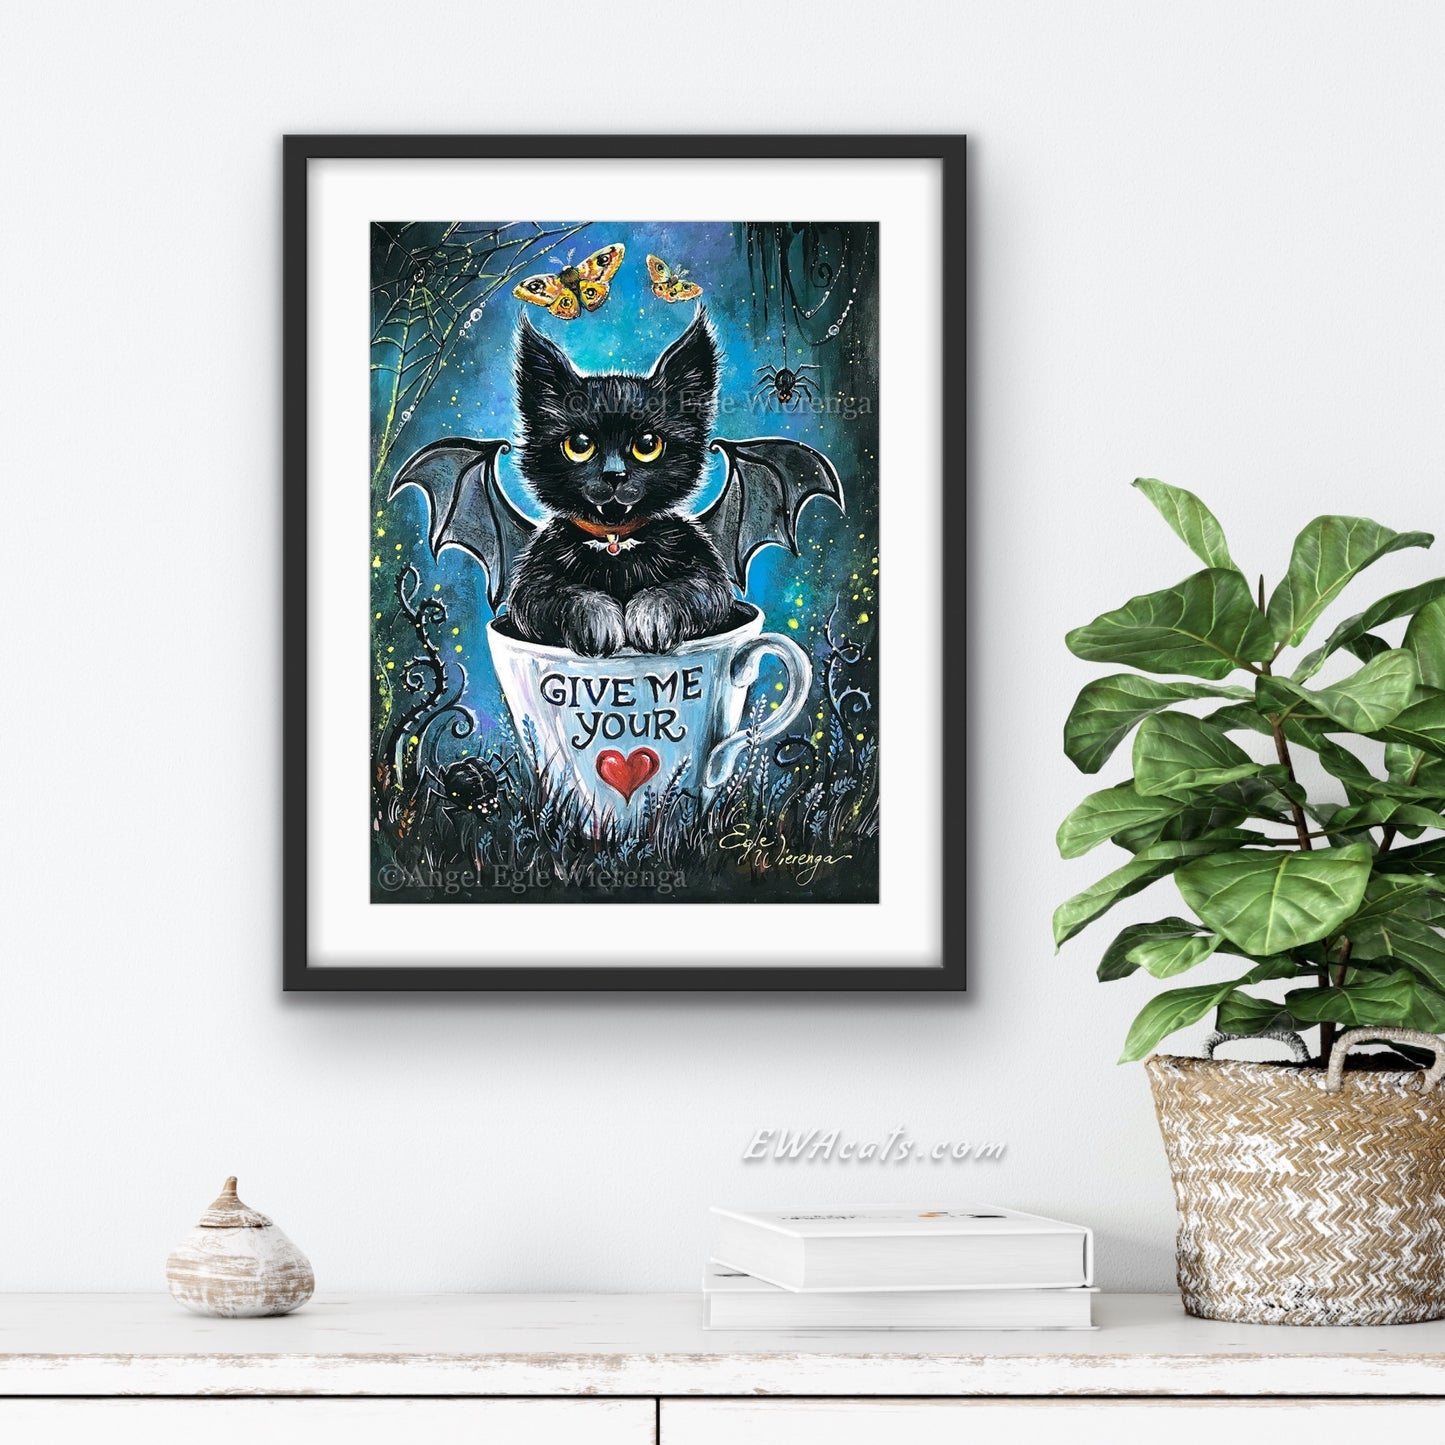 Art Print "Give Me Your Heart"